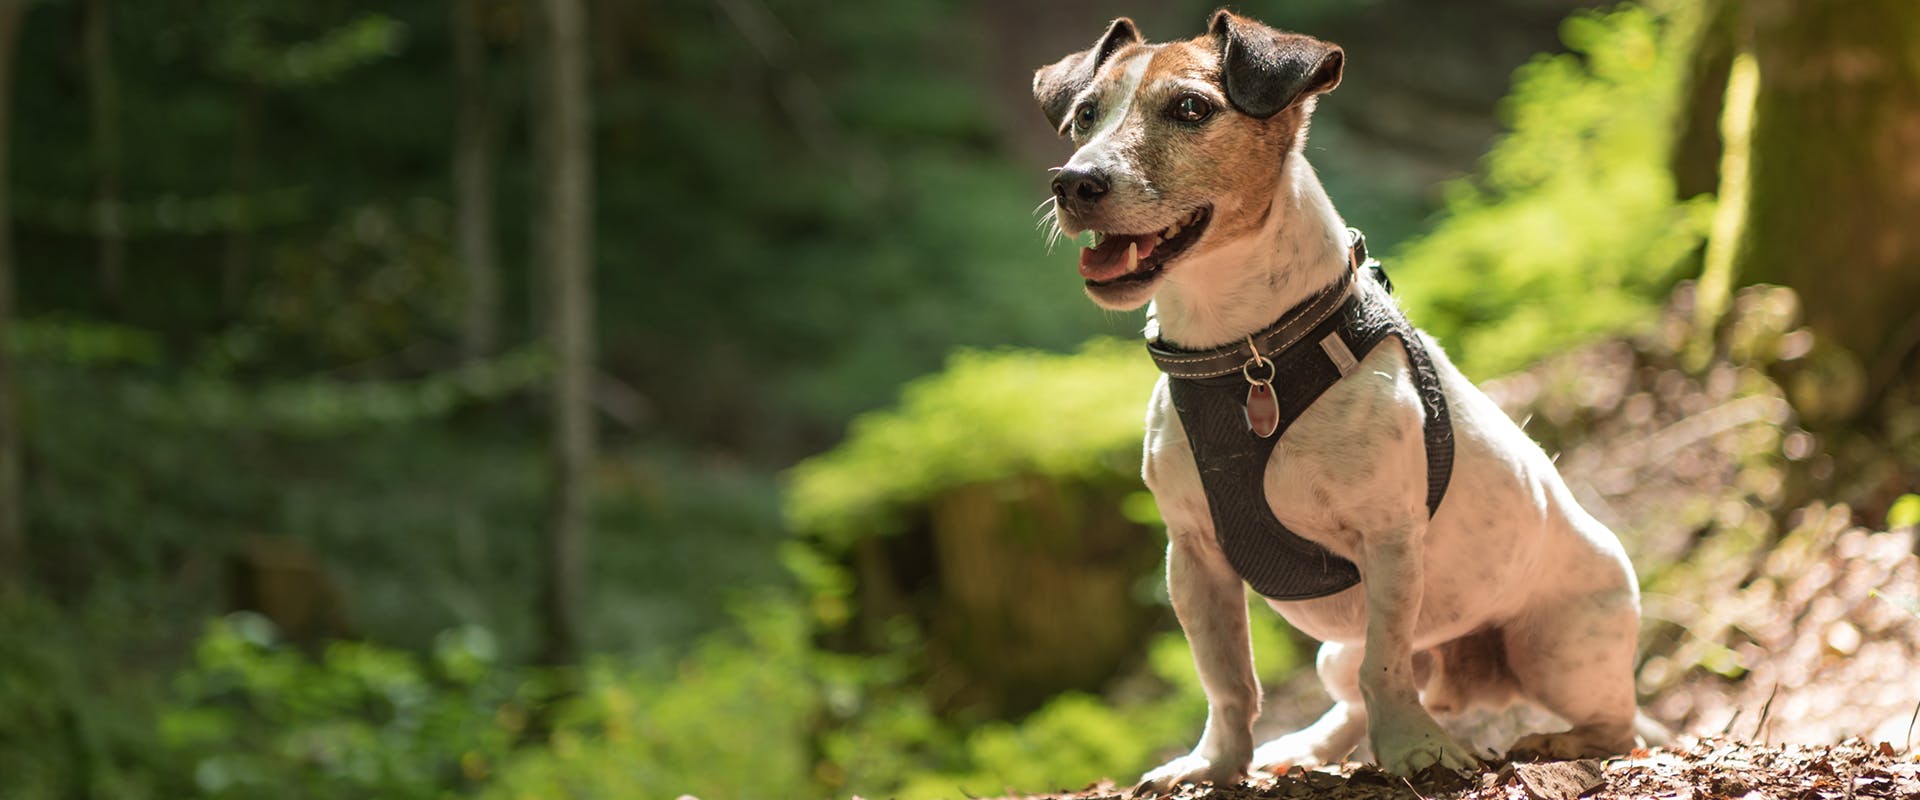 A dog, wearing a harness and an ID tag, standing in the middle of a forest